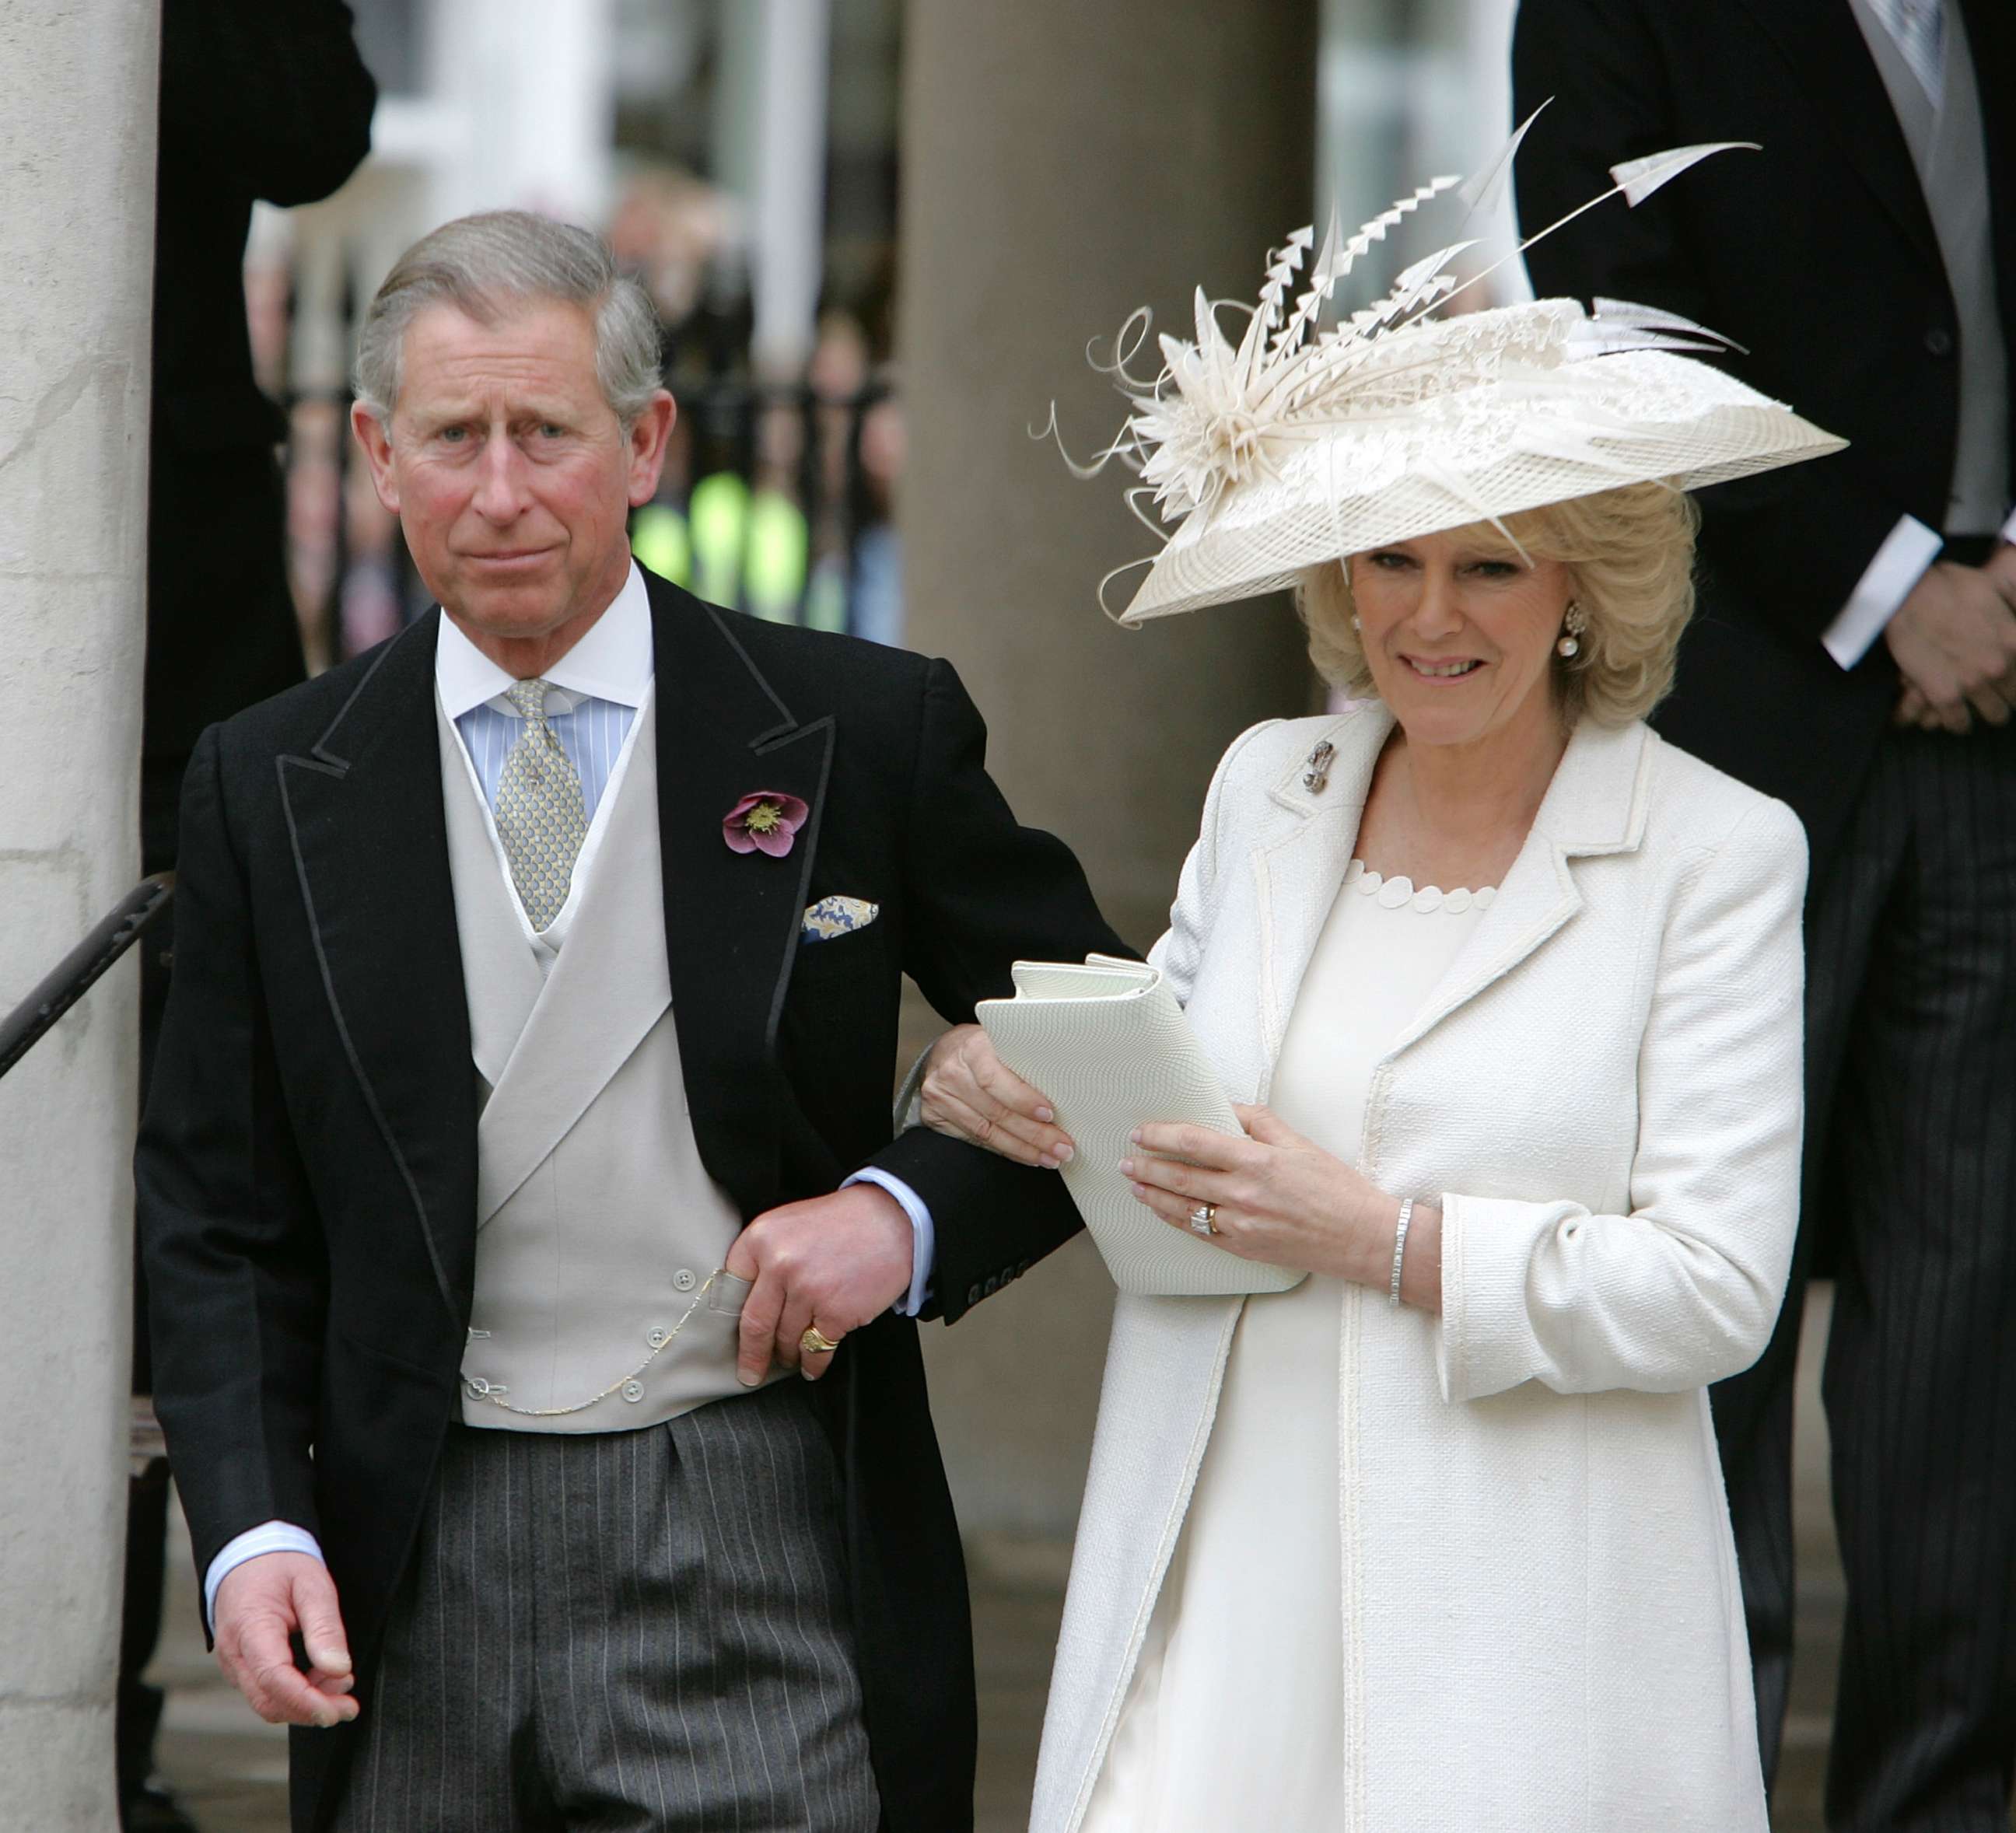 PHOTO: Prince Charles and his wife Camilla, the Duchess of Cornwall, depart the Civil Ceremony where they were legally married, at the Guildhall, Windsor on April 9, 2005 in Berkshire, England.